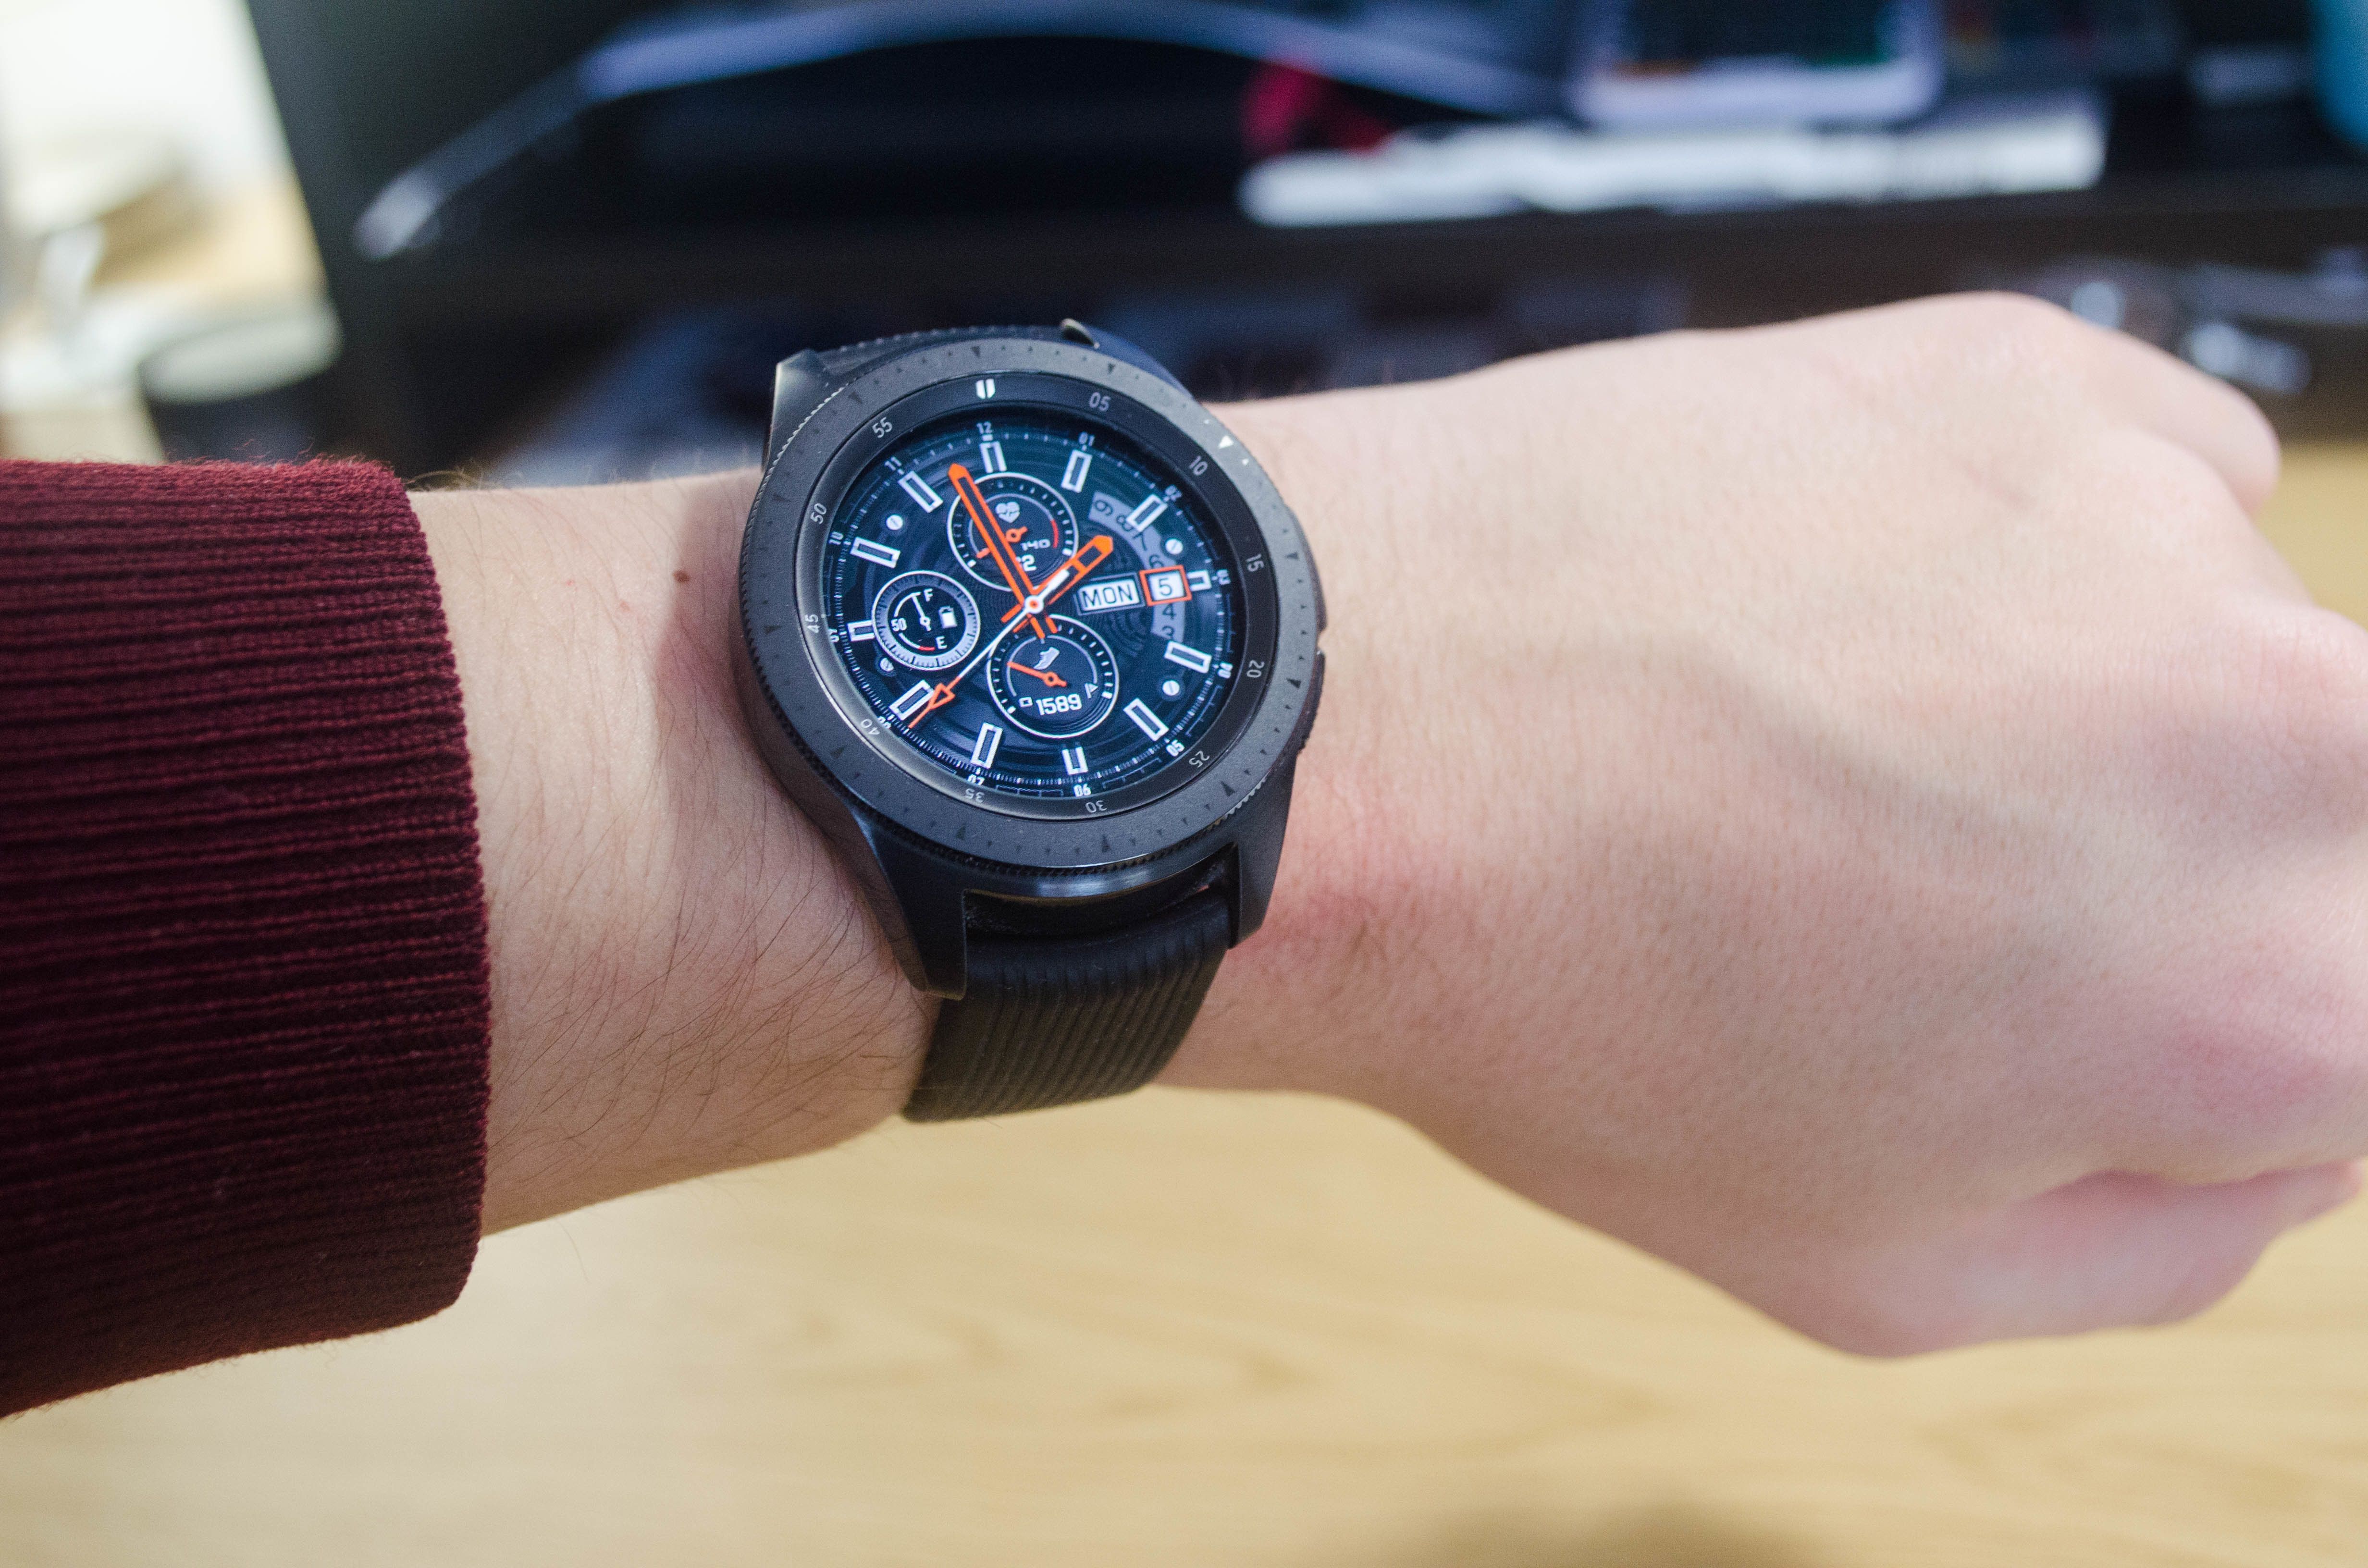 Samsung Galaxy Watch review: The (almost) complete smartwatch